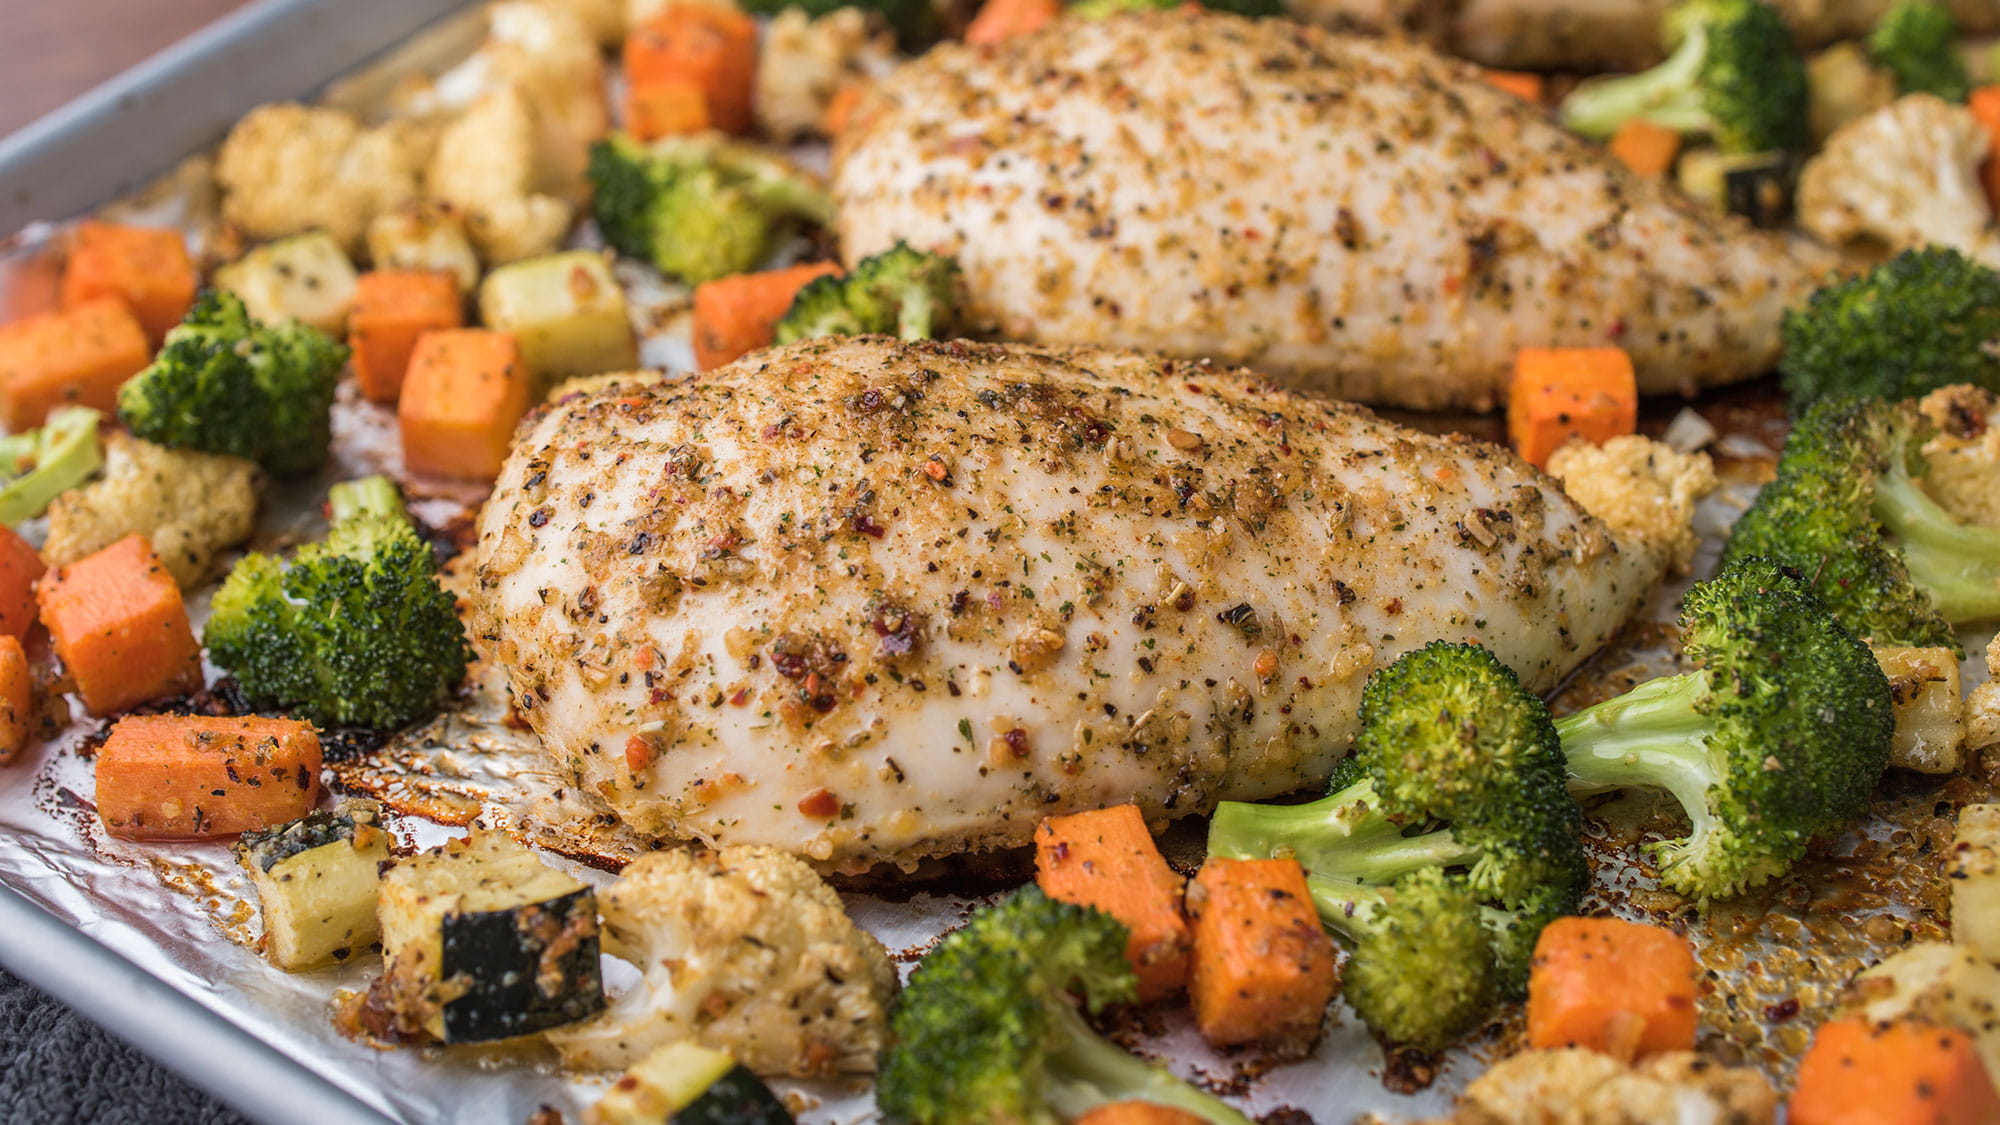 farmers_market_chicken_and_vegetables_2000x1125.jpg